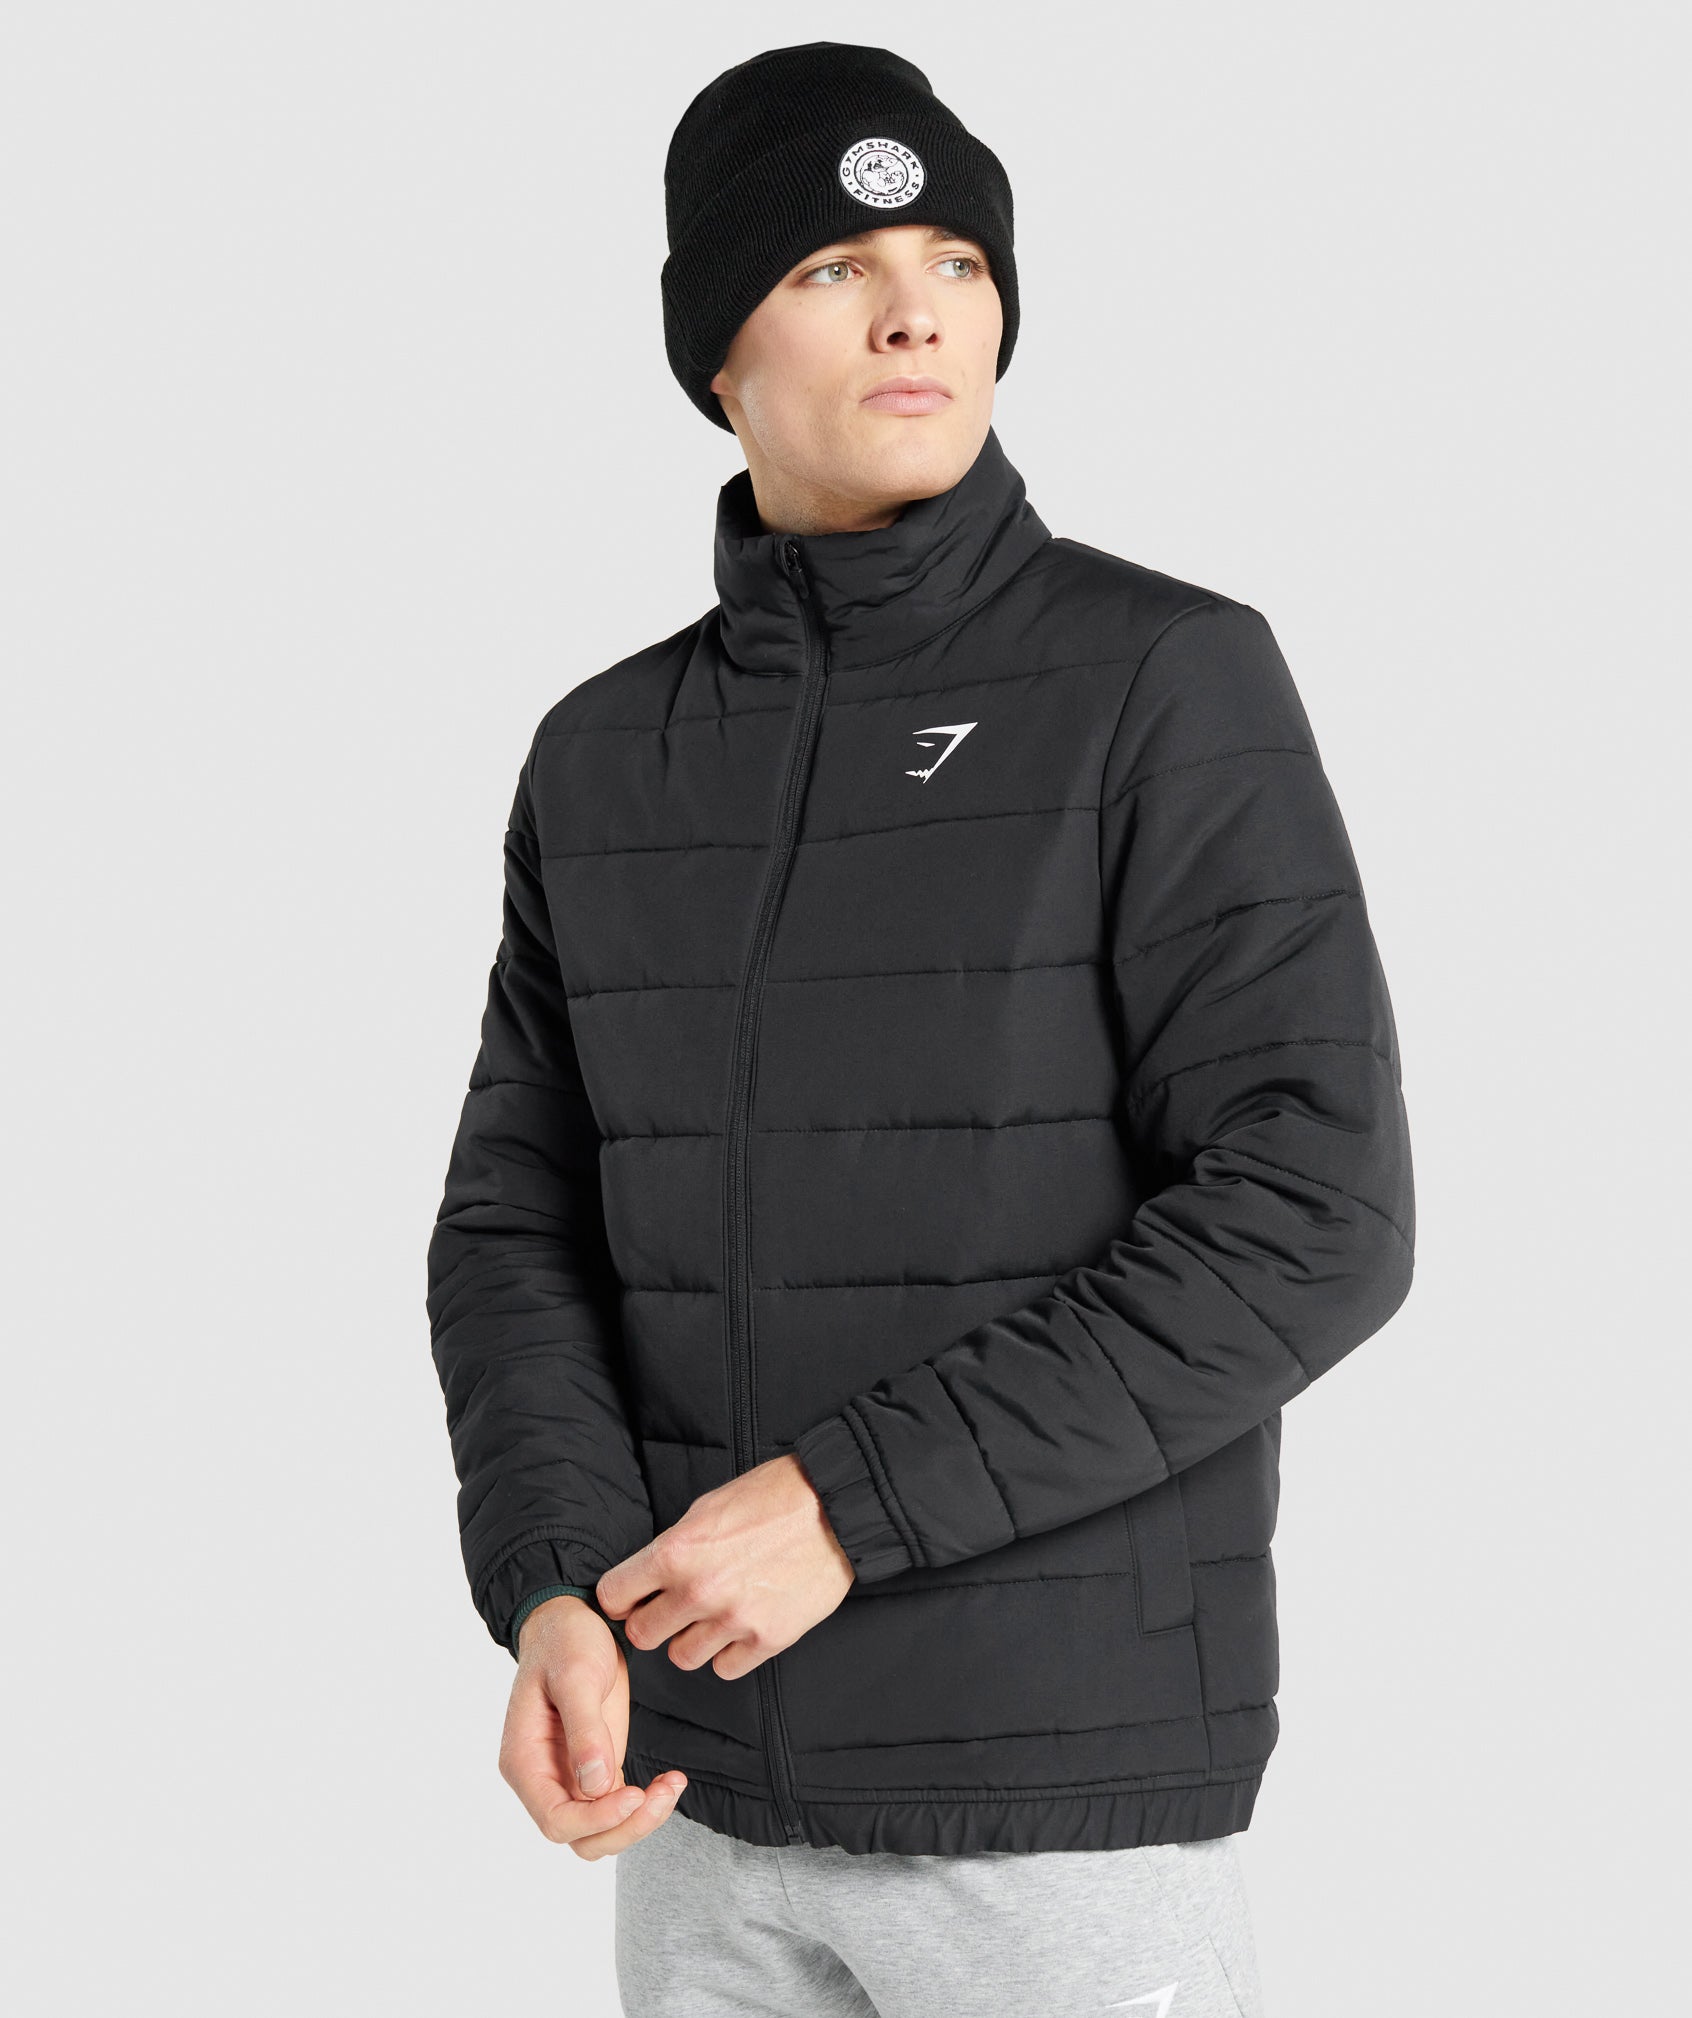 Crest Padded Jacket in Black - view 1